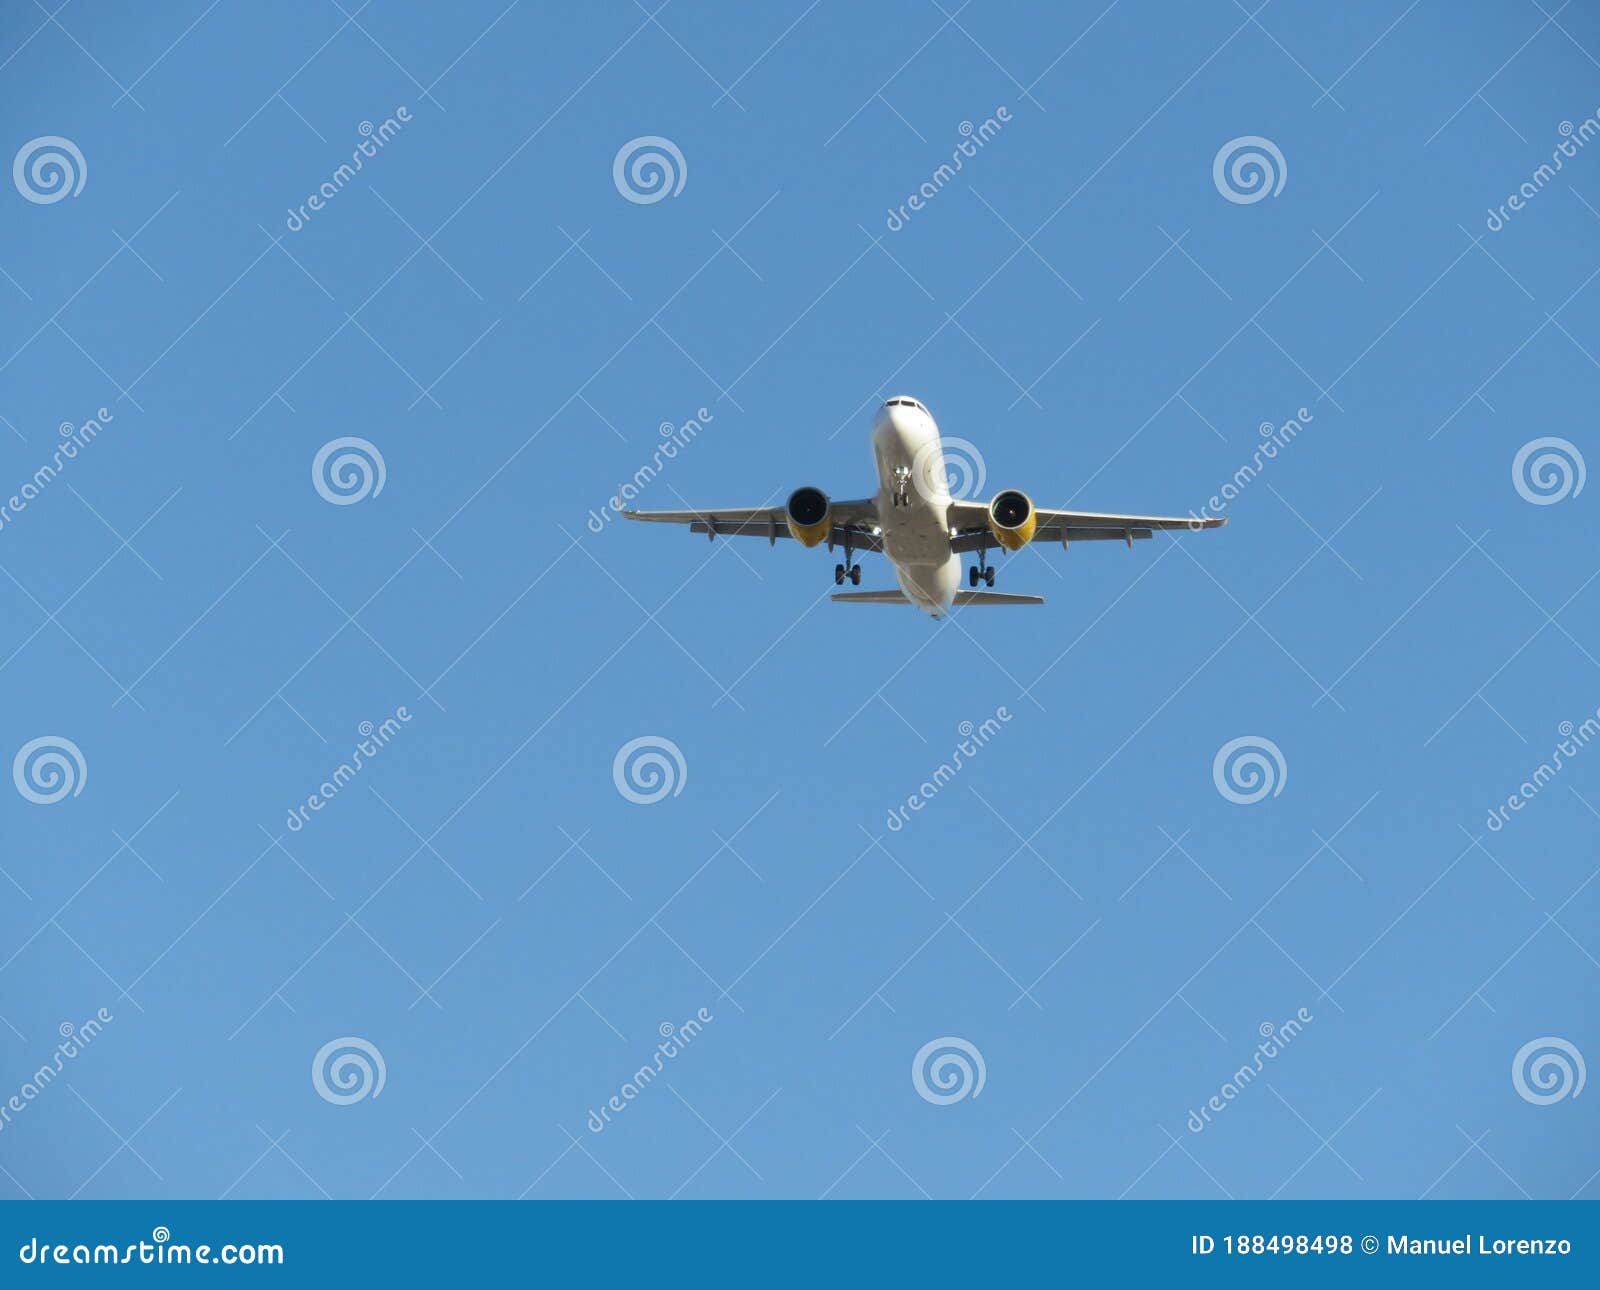 beautiful photo of a plane landing at the airport taking land